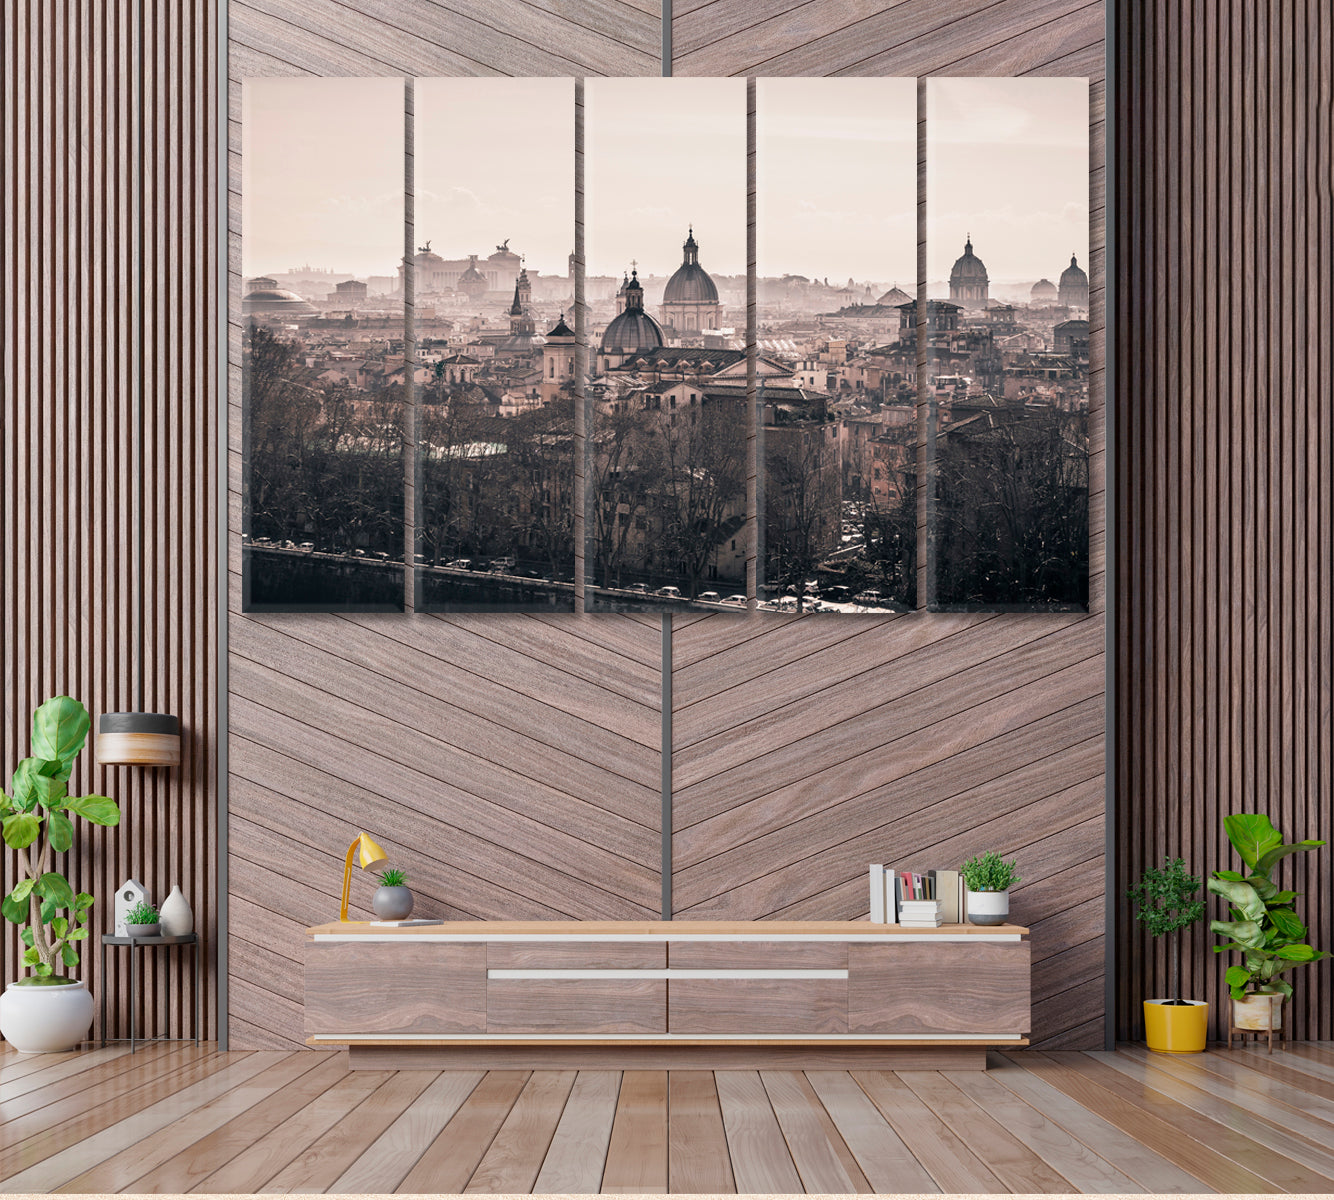 Ancient Churches in Fog Rome Italy Canvas Print ArtLexy 5 Panels 36"x24" inches 